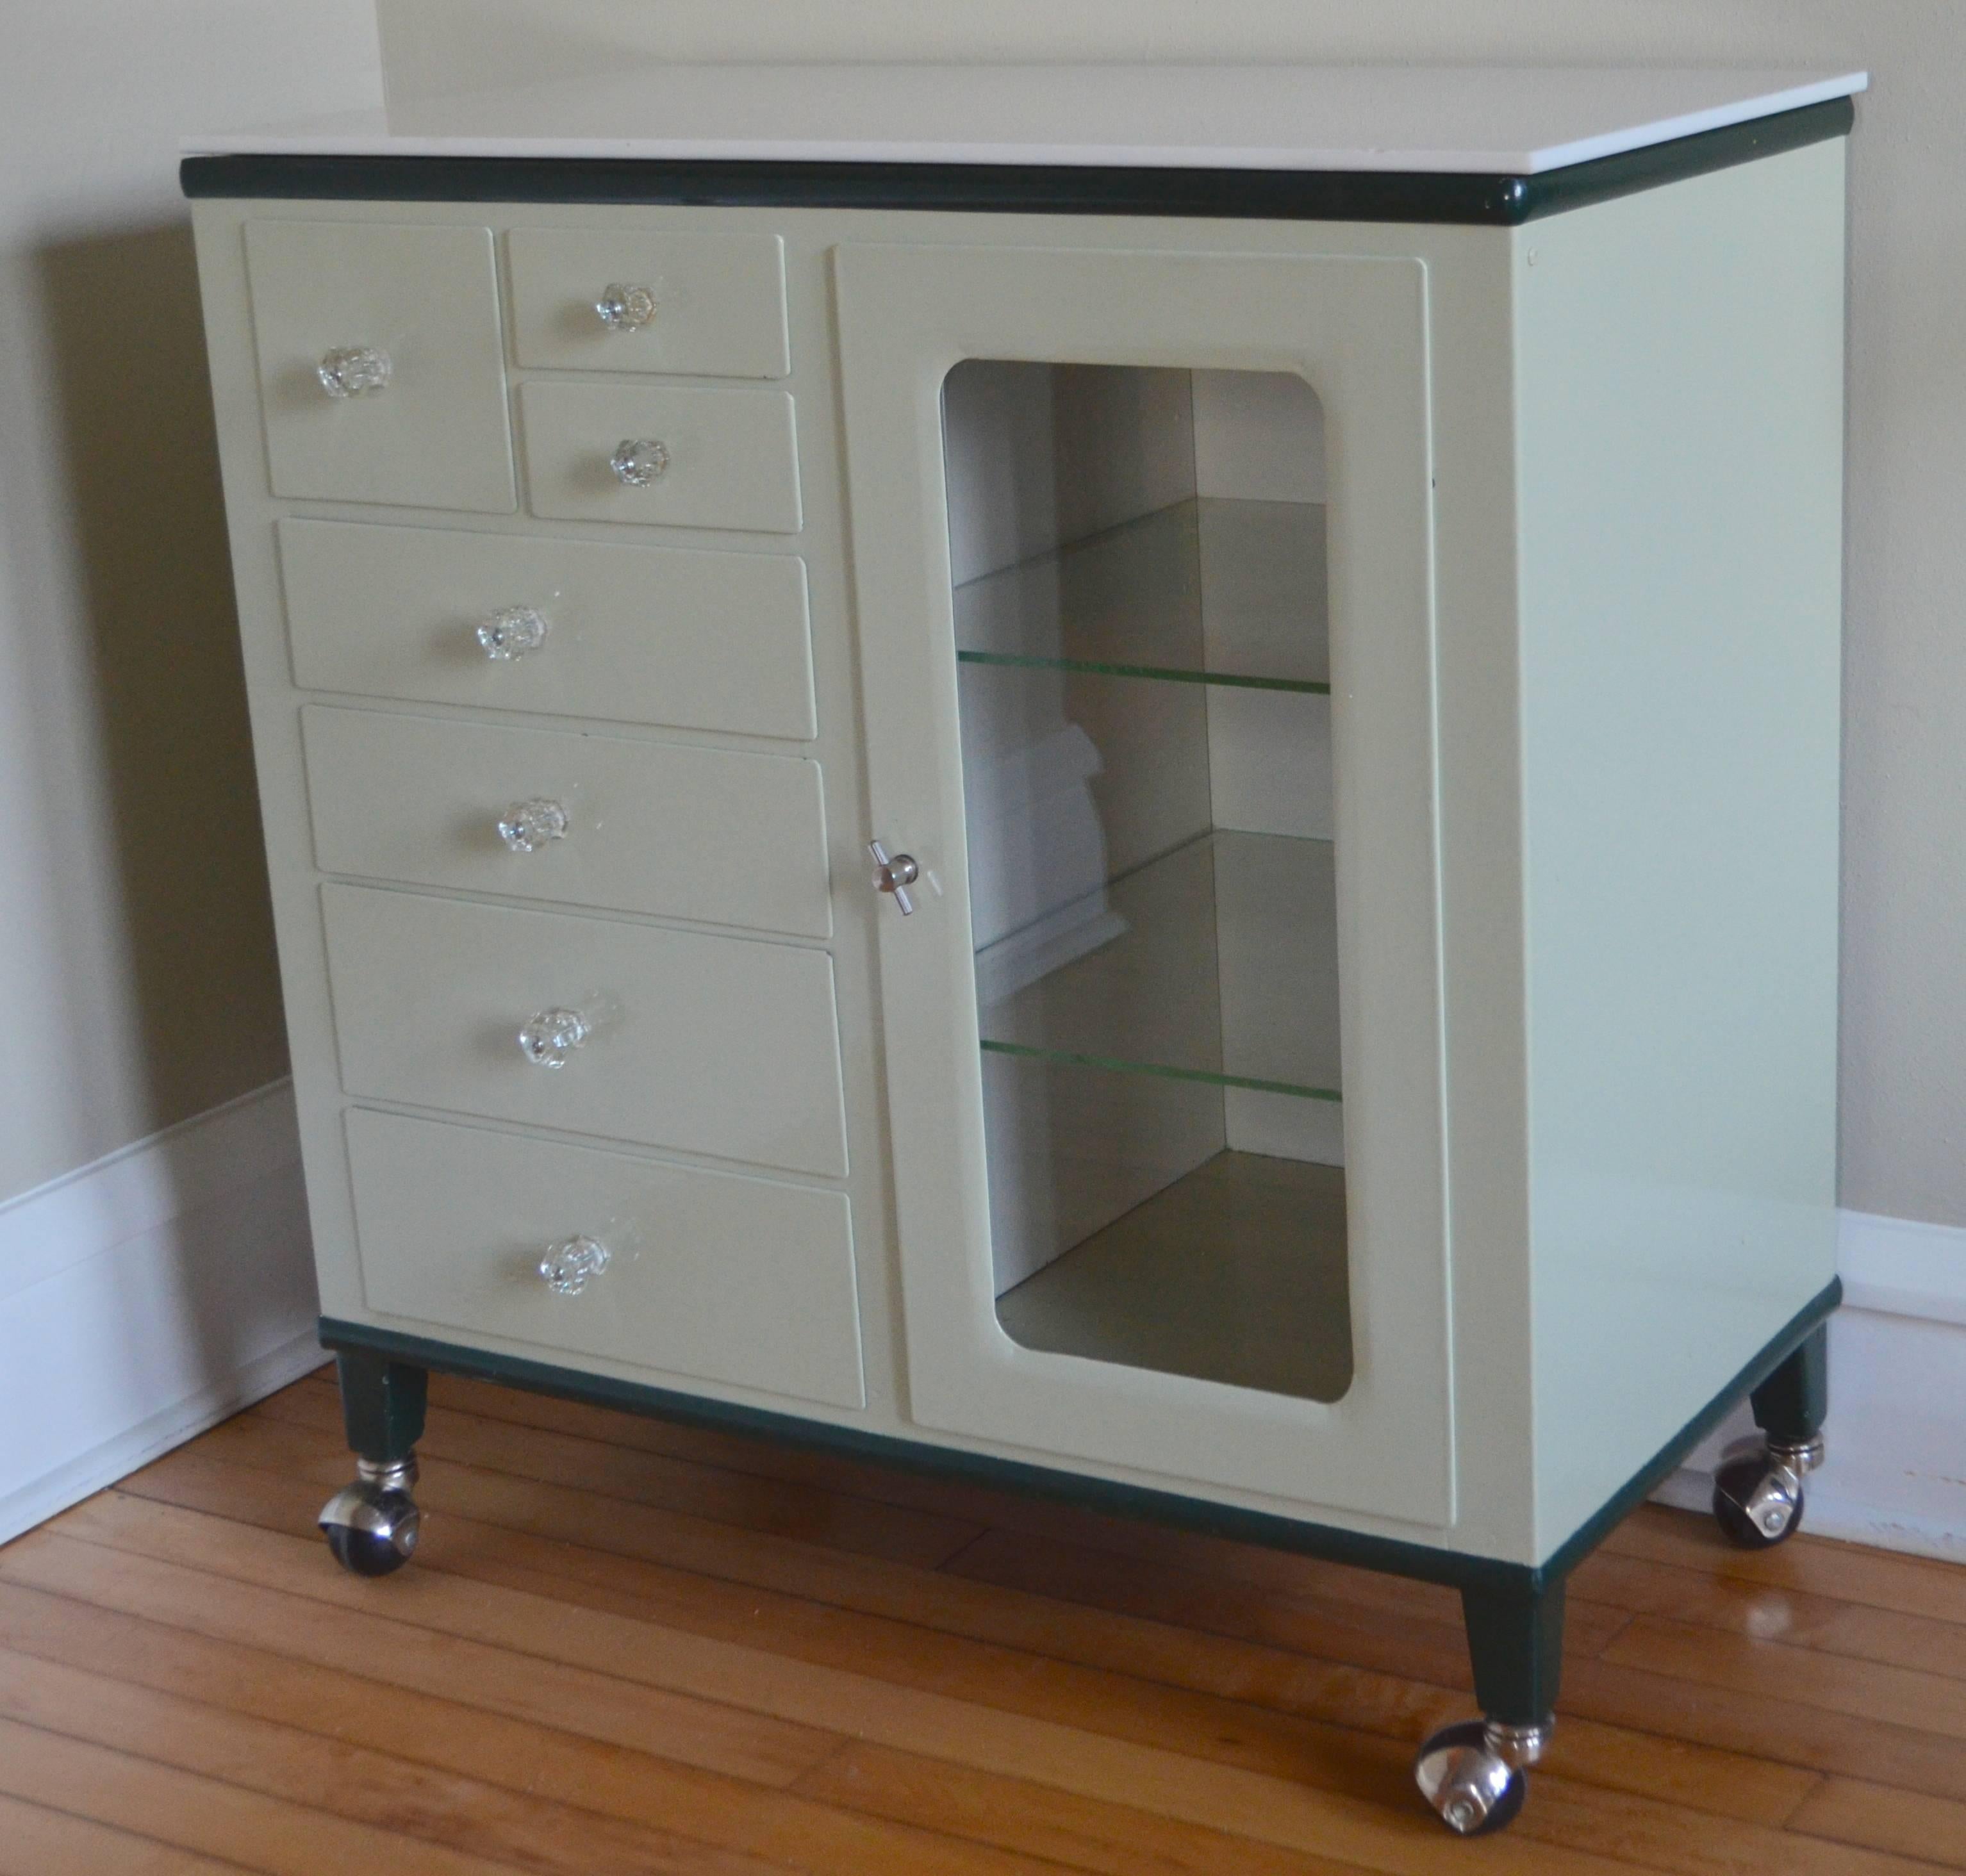 Midcentury dental cabinet. Sweet piece, immaculate condition except for slight chip in milk glass top. All original except for the wheels that were added subsequently.